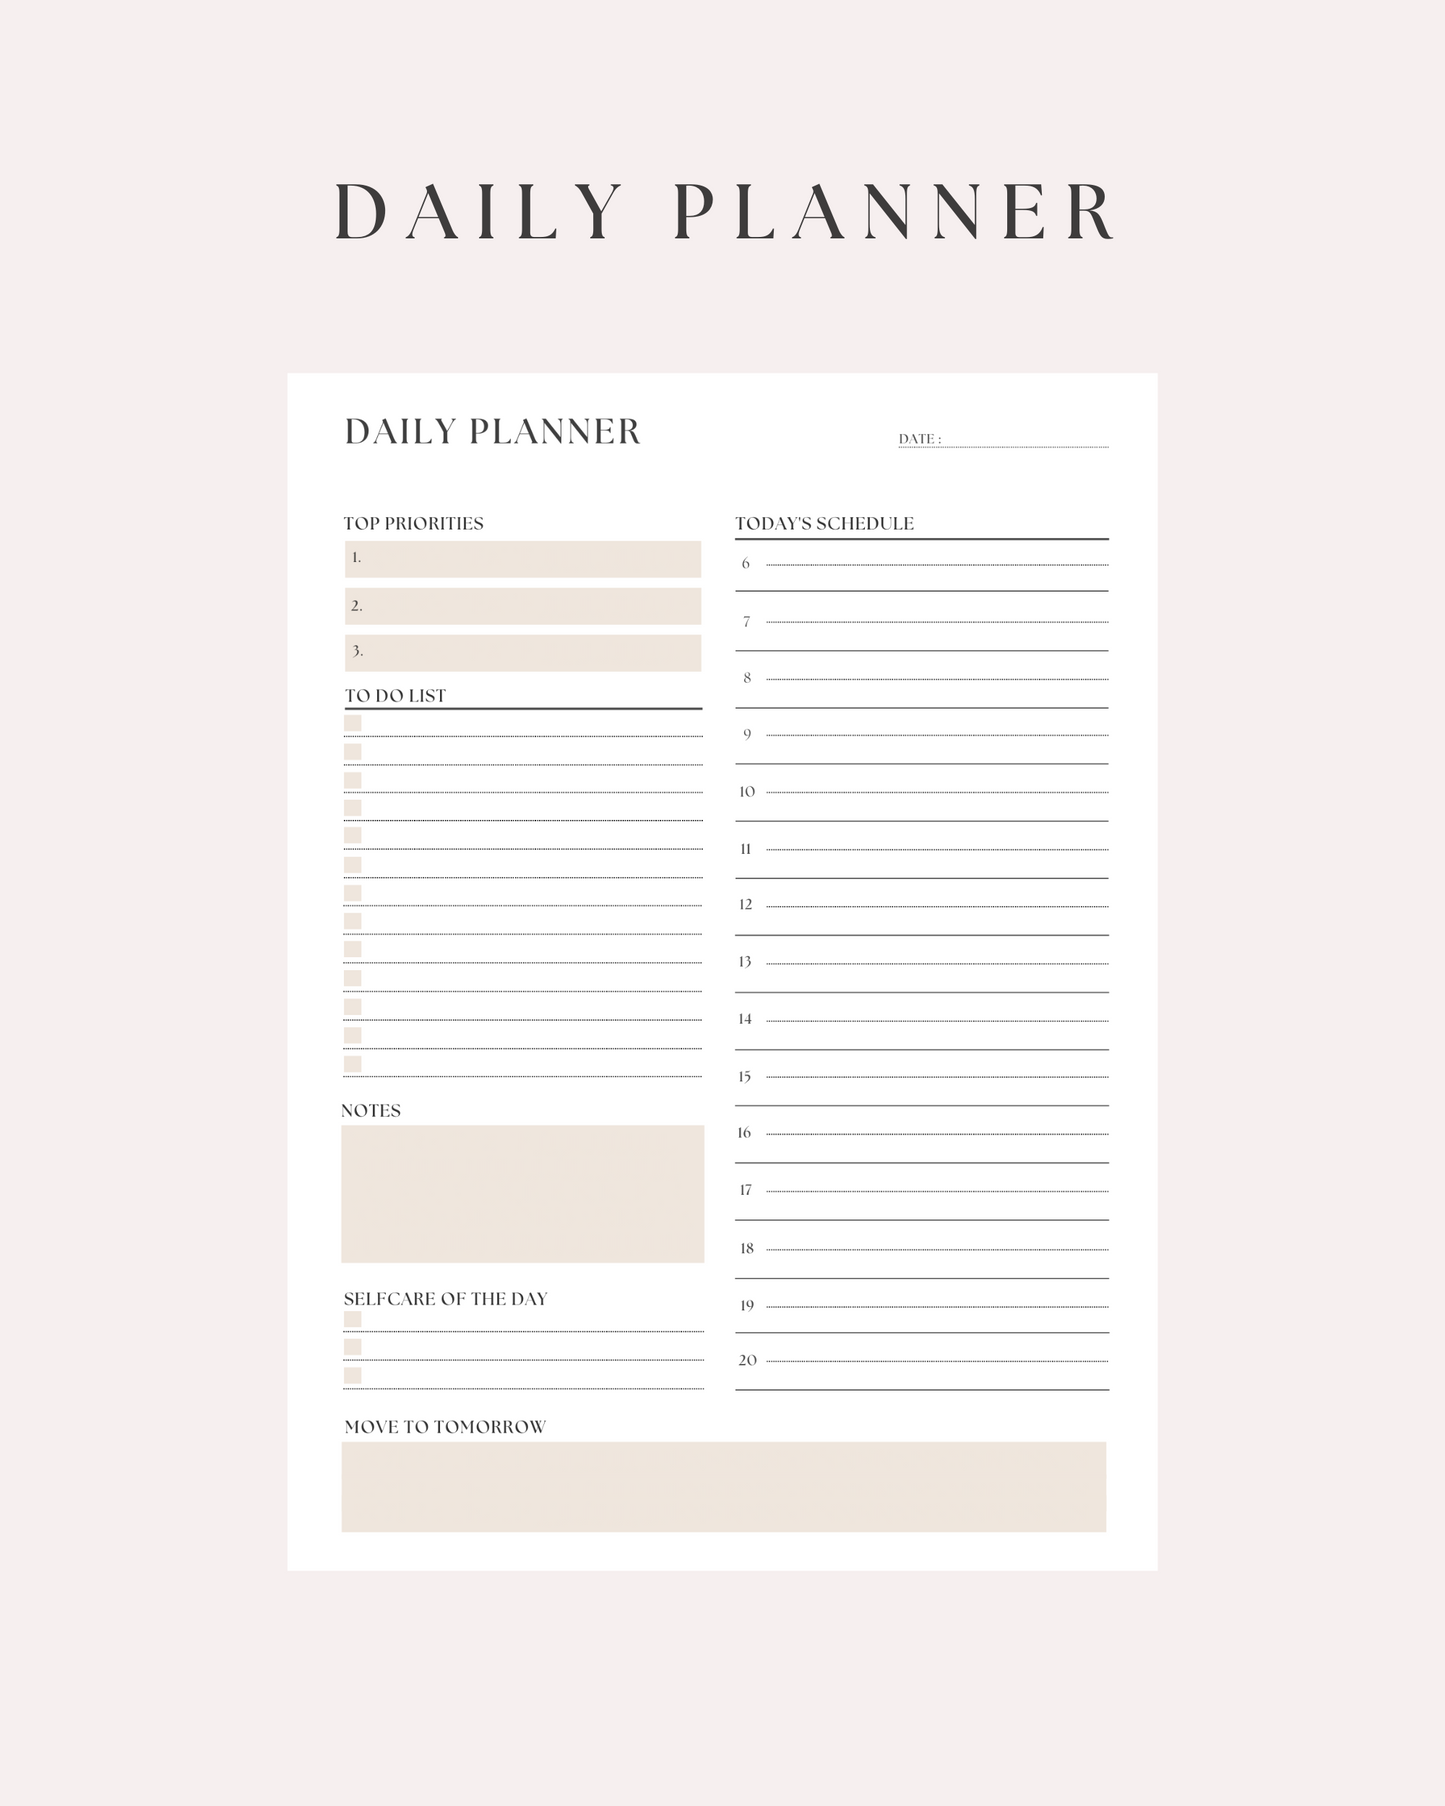 Plan for success – Daily planner insert